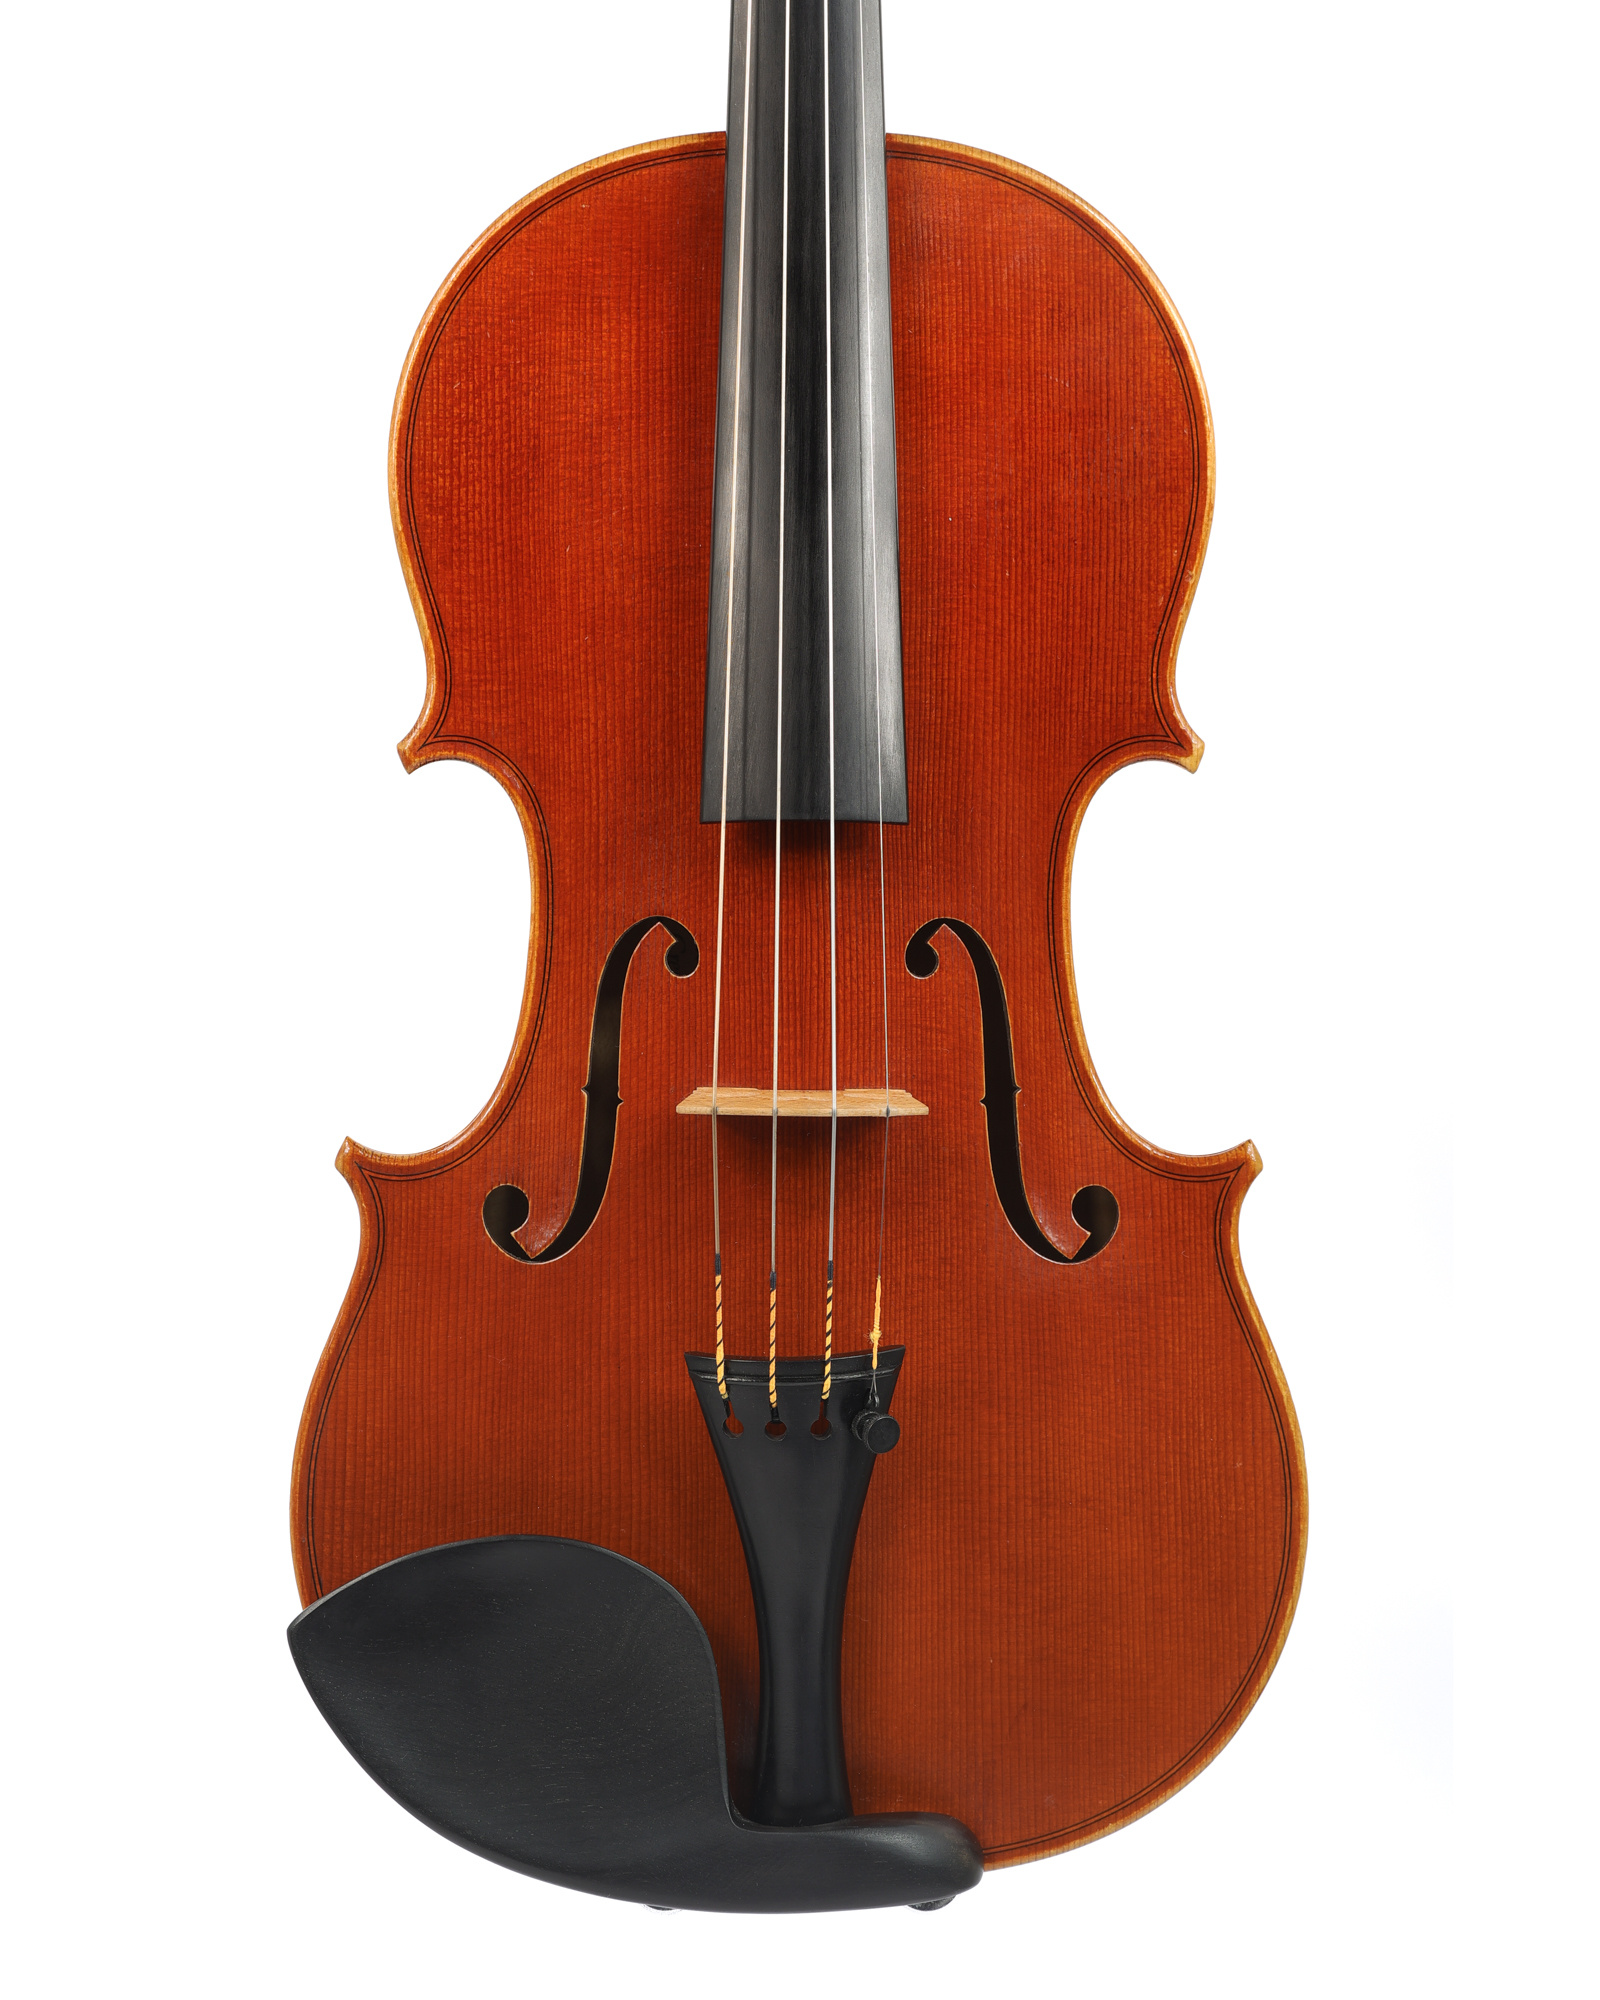 Italian Francesco Toto violin, 2002, Cremona, ITALY, with maker's certificate of authenticity